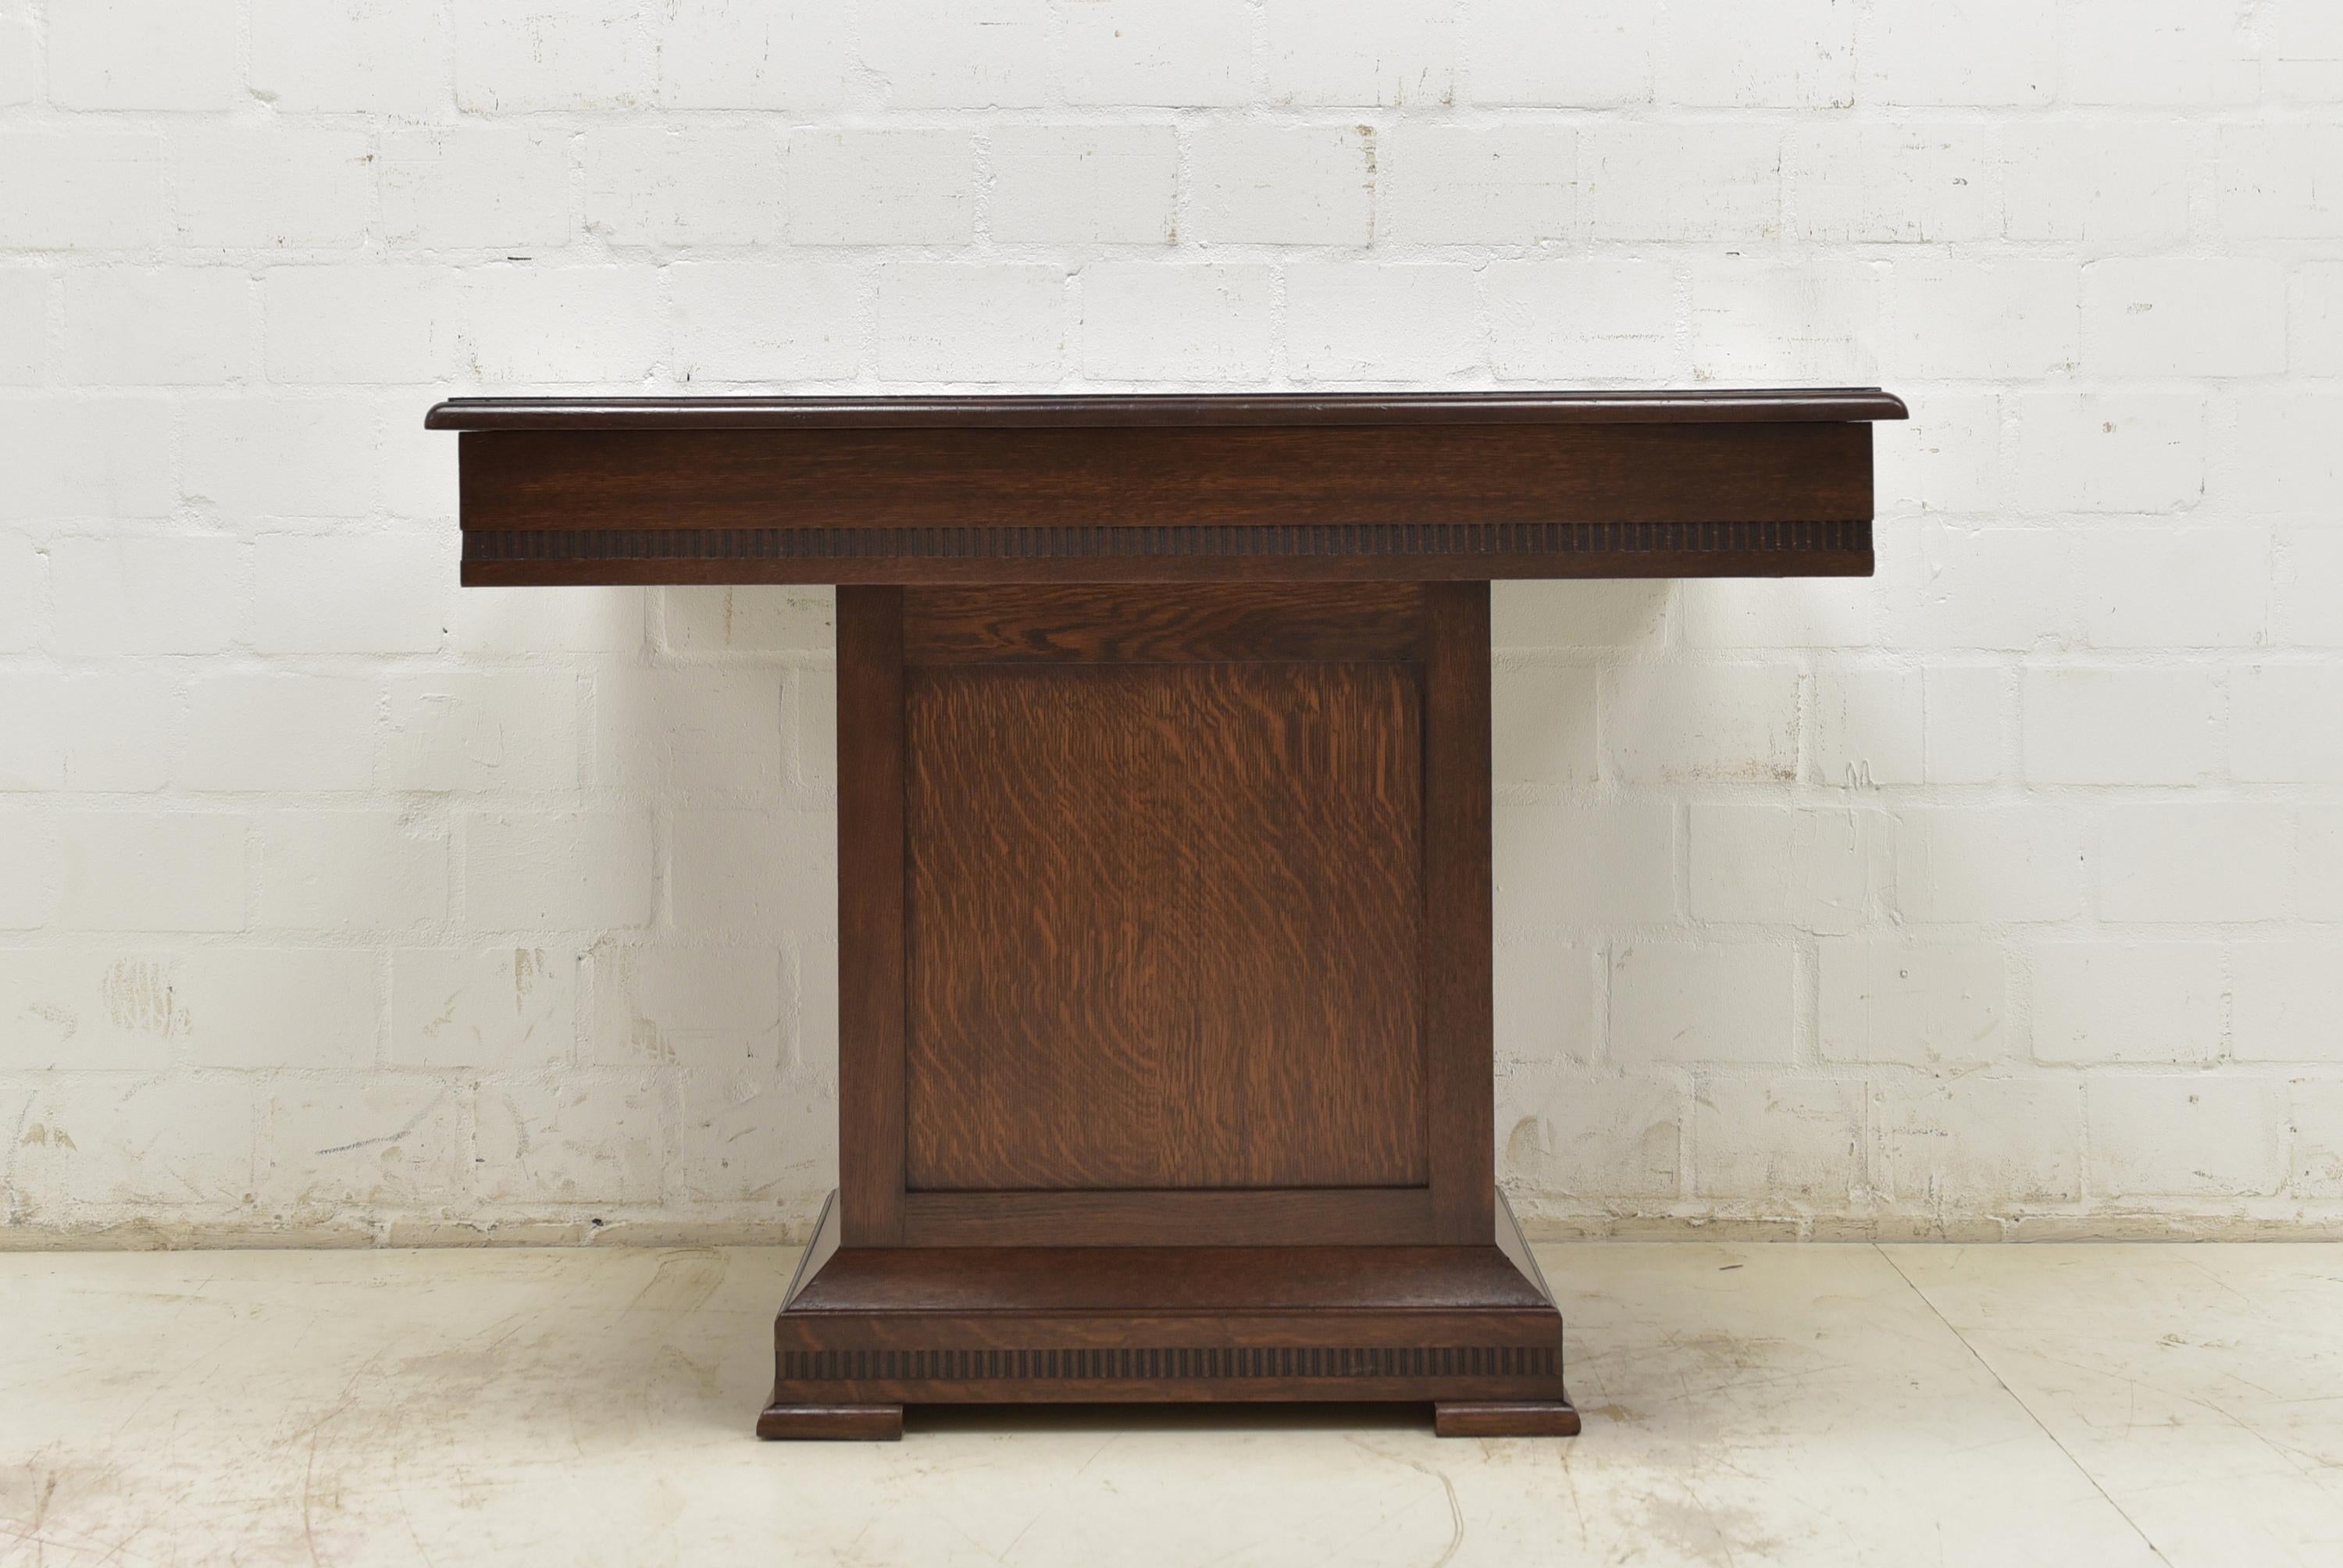 Small dining table restored solid oak Art Deco around 1925 Angular table

Features:
Rectangular slab on a leg / pedestal
High quality
Beautiful details
Quite factual design
Very rare dimensions
Beautiful patina

Additional